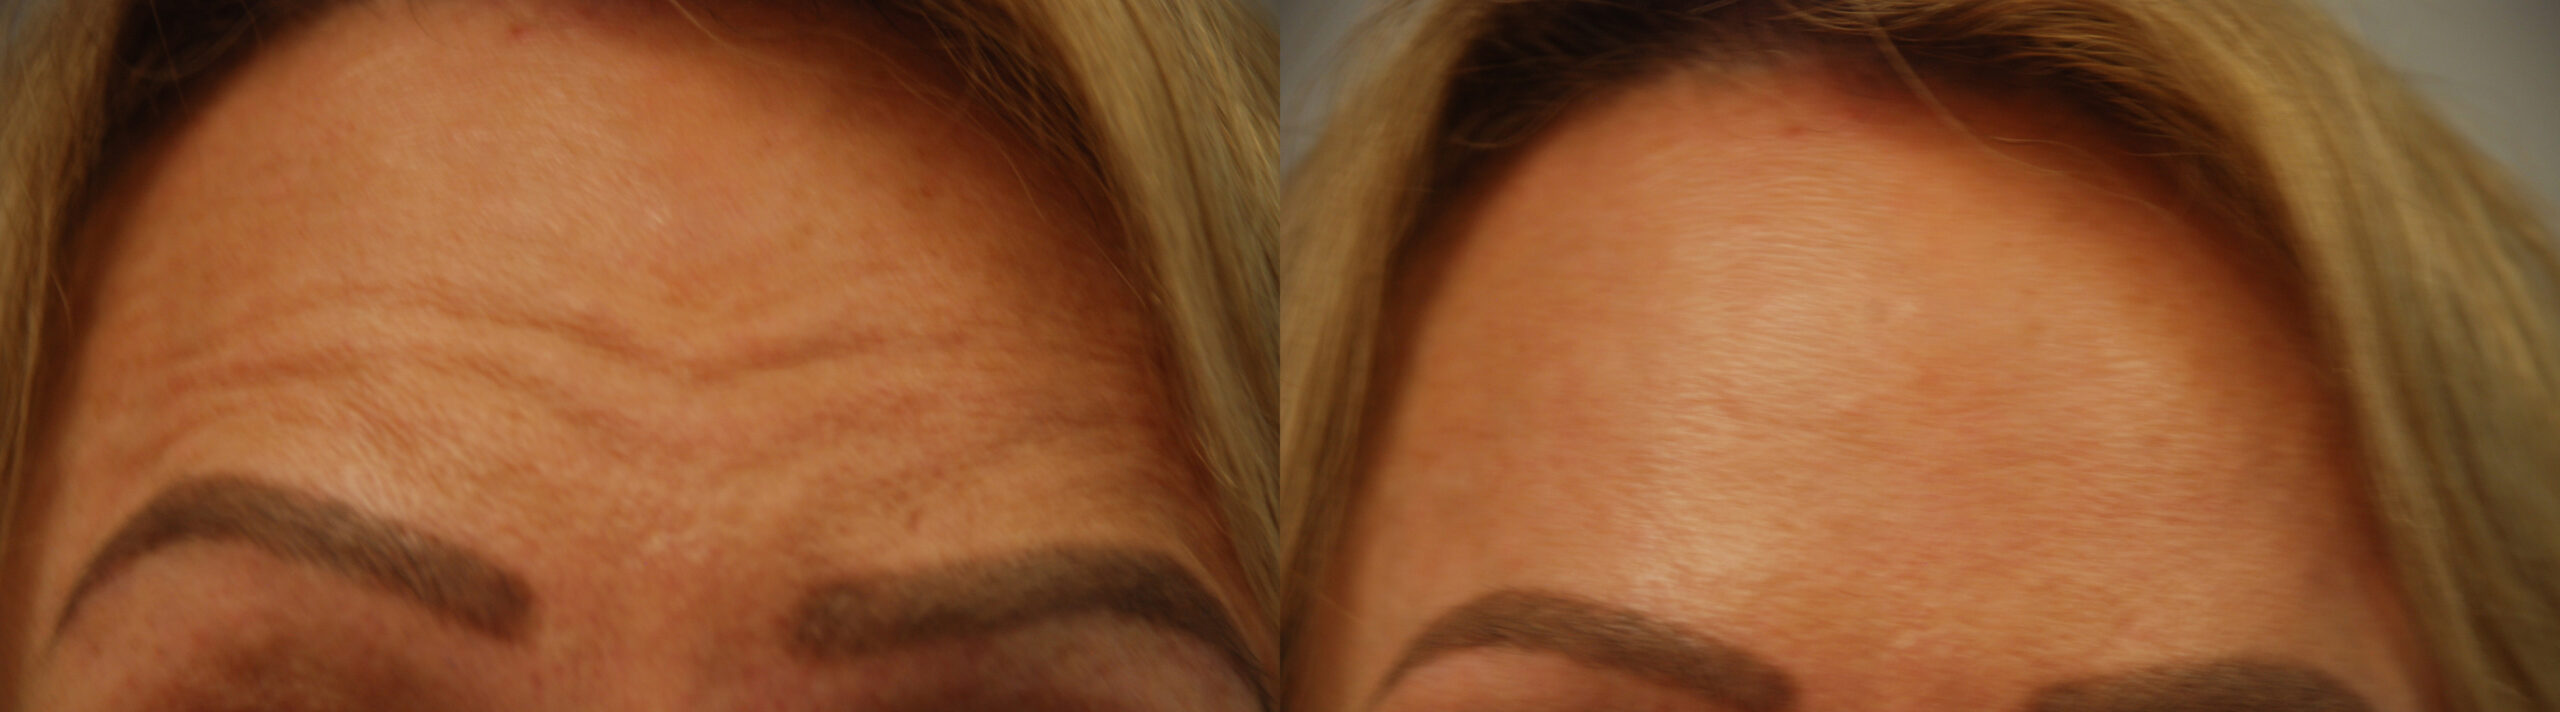 Botox® Before and After photo by Radiansia, Total Aesthetic Solutions in Bloomfield, CT